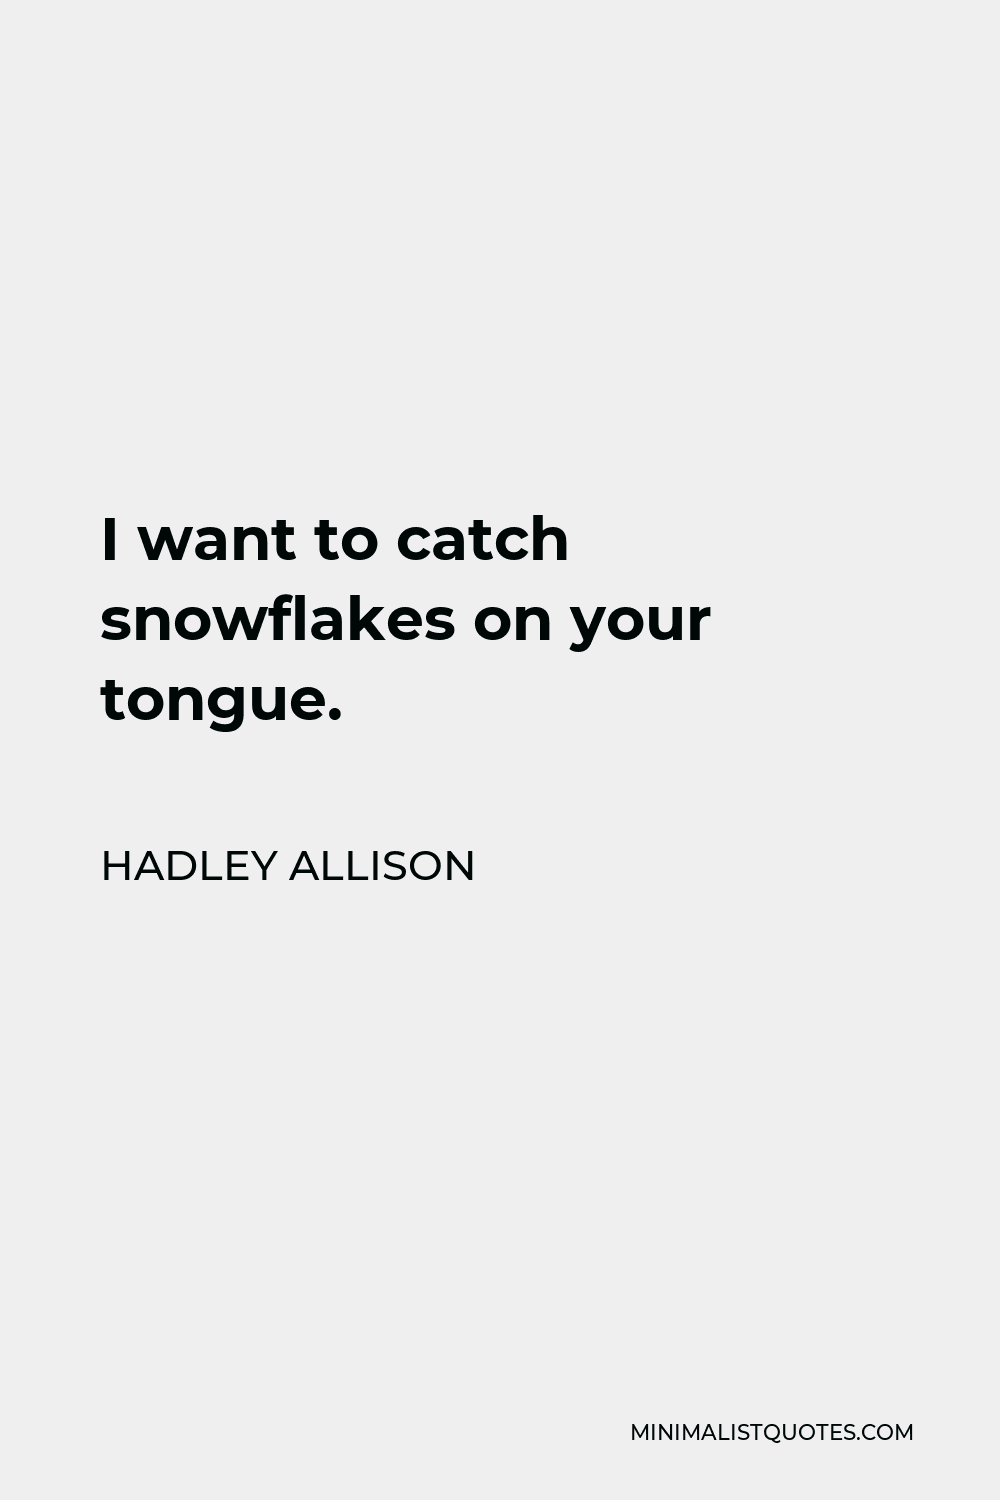 Hadley Allison Quote - I want to catch snowflakes on your tongue.